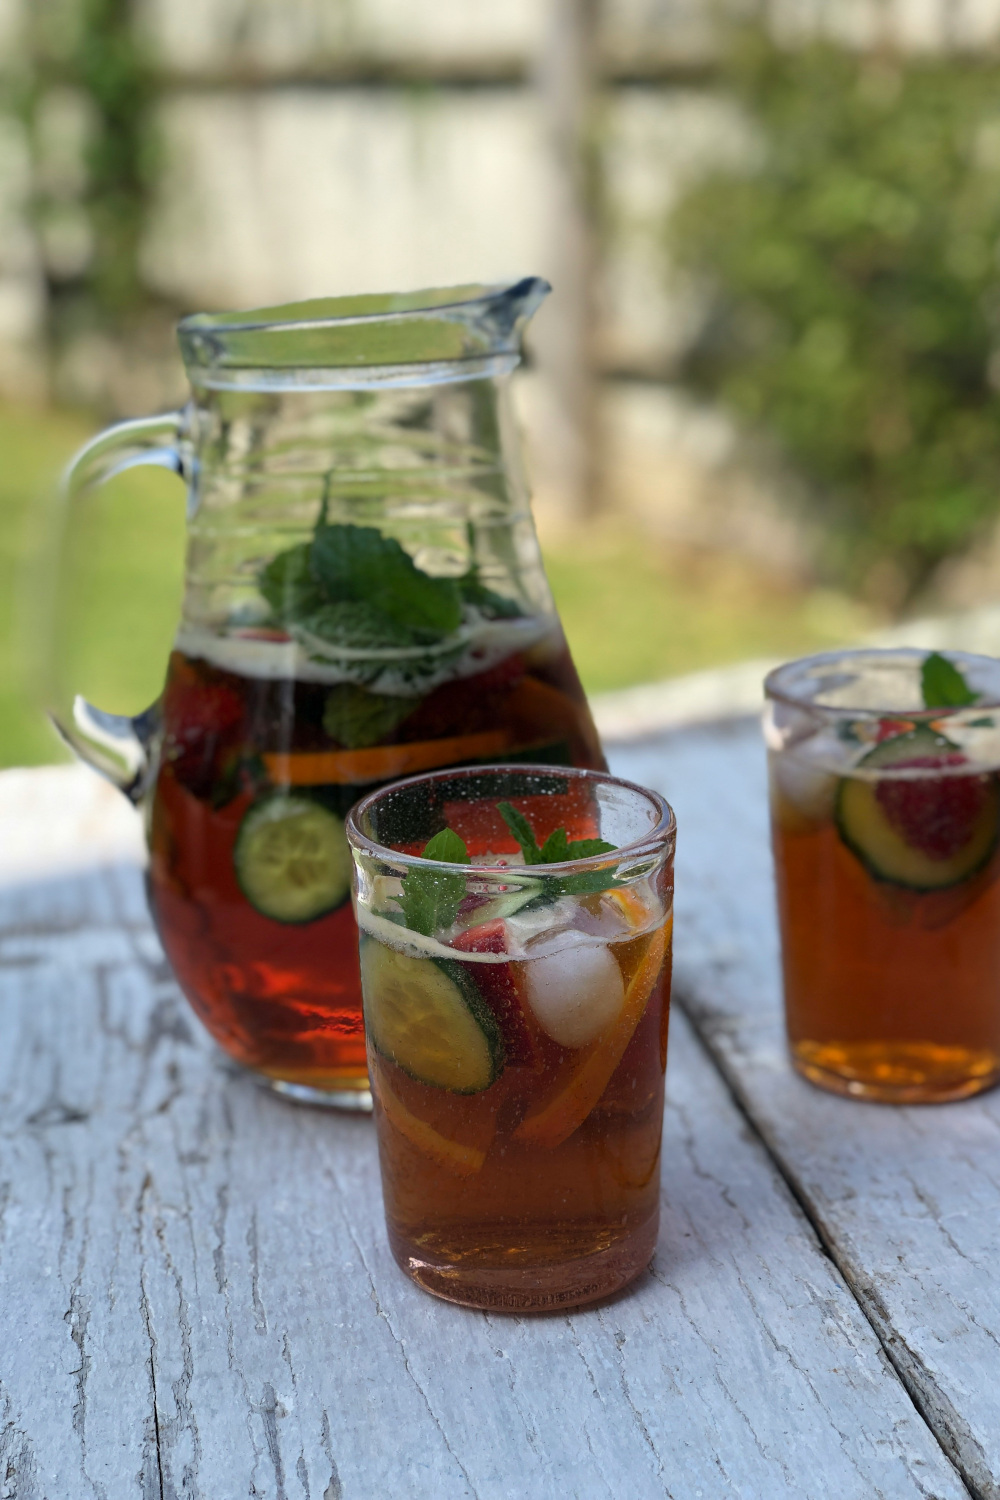 Pimm's O'Clock: Here's How To Make Summer's Signature Drink